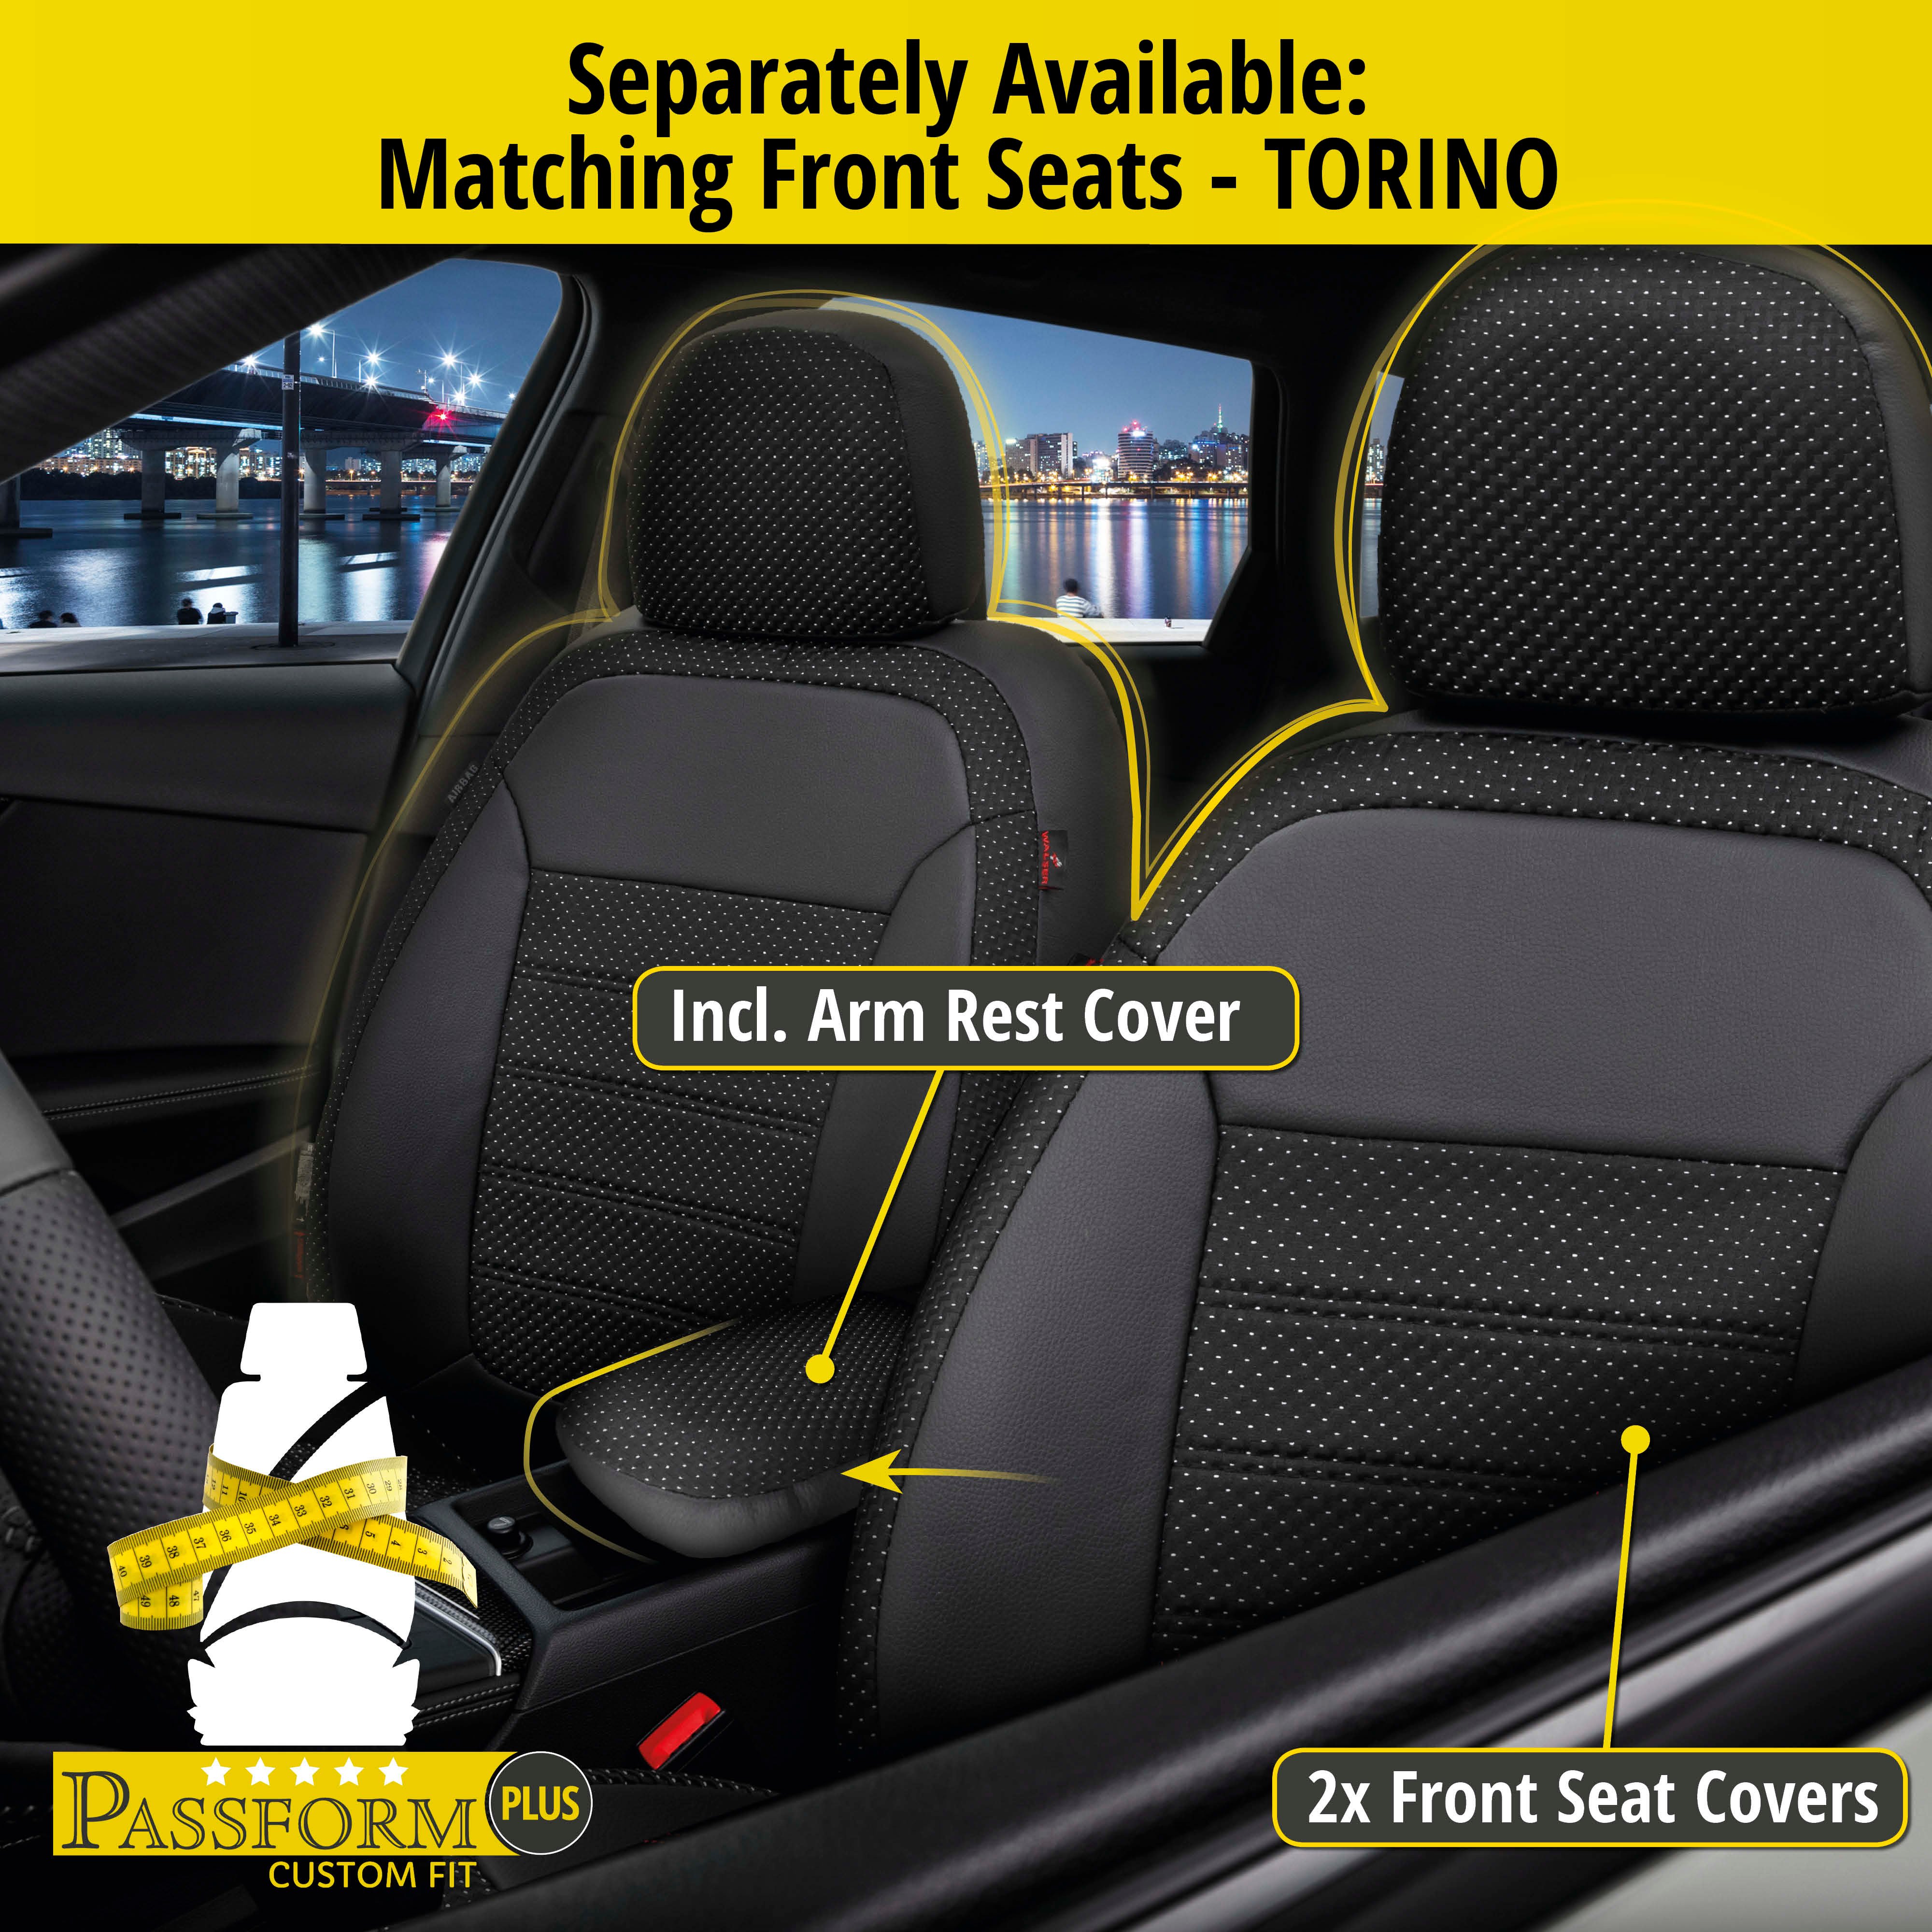 Seat cover Torino for Audi A3 2012-Today, 1 rear seat cover for sport seats